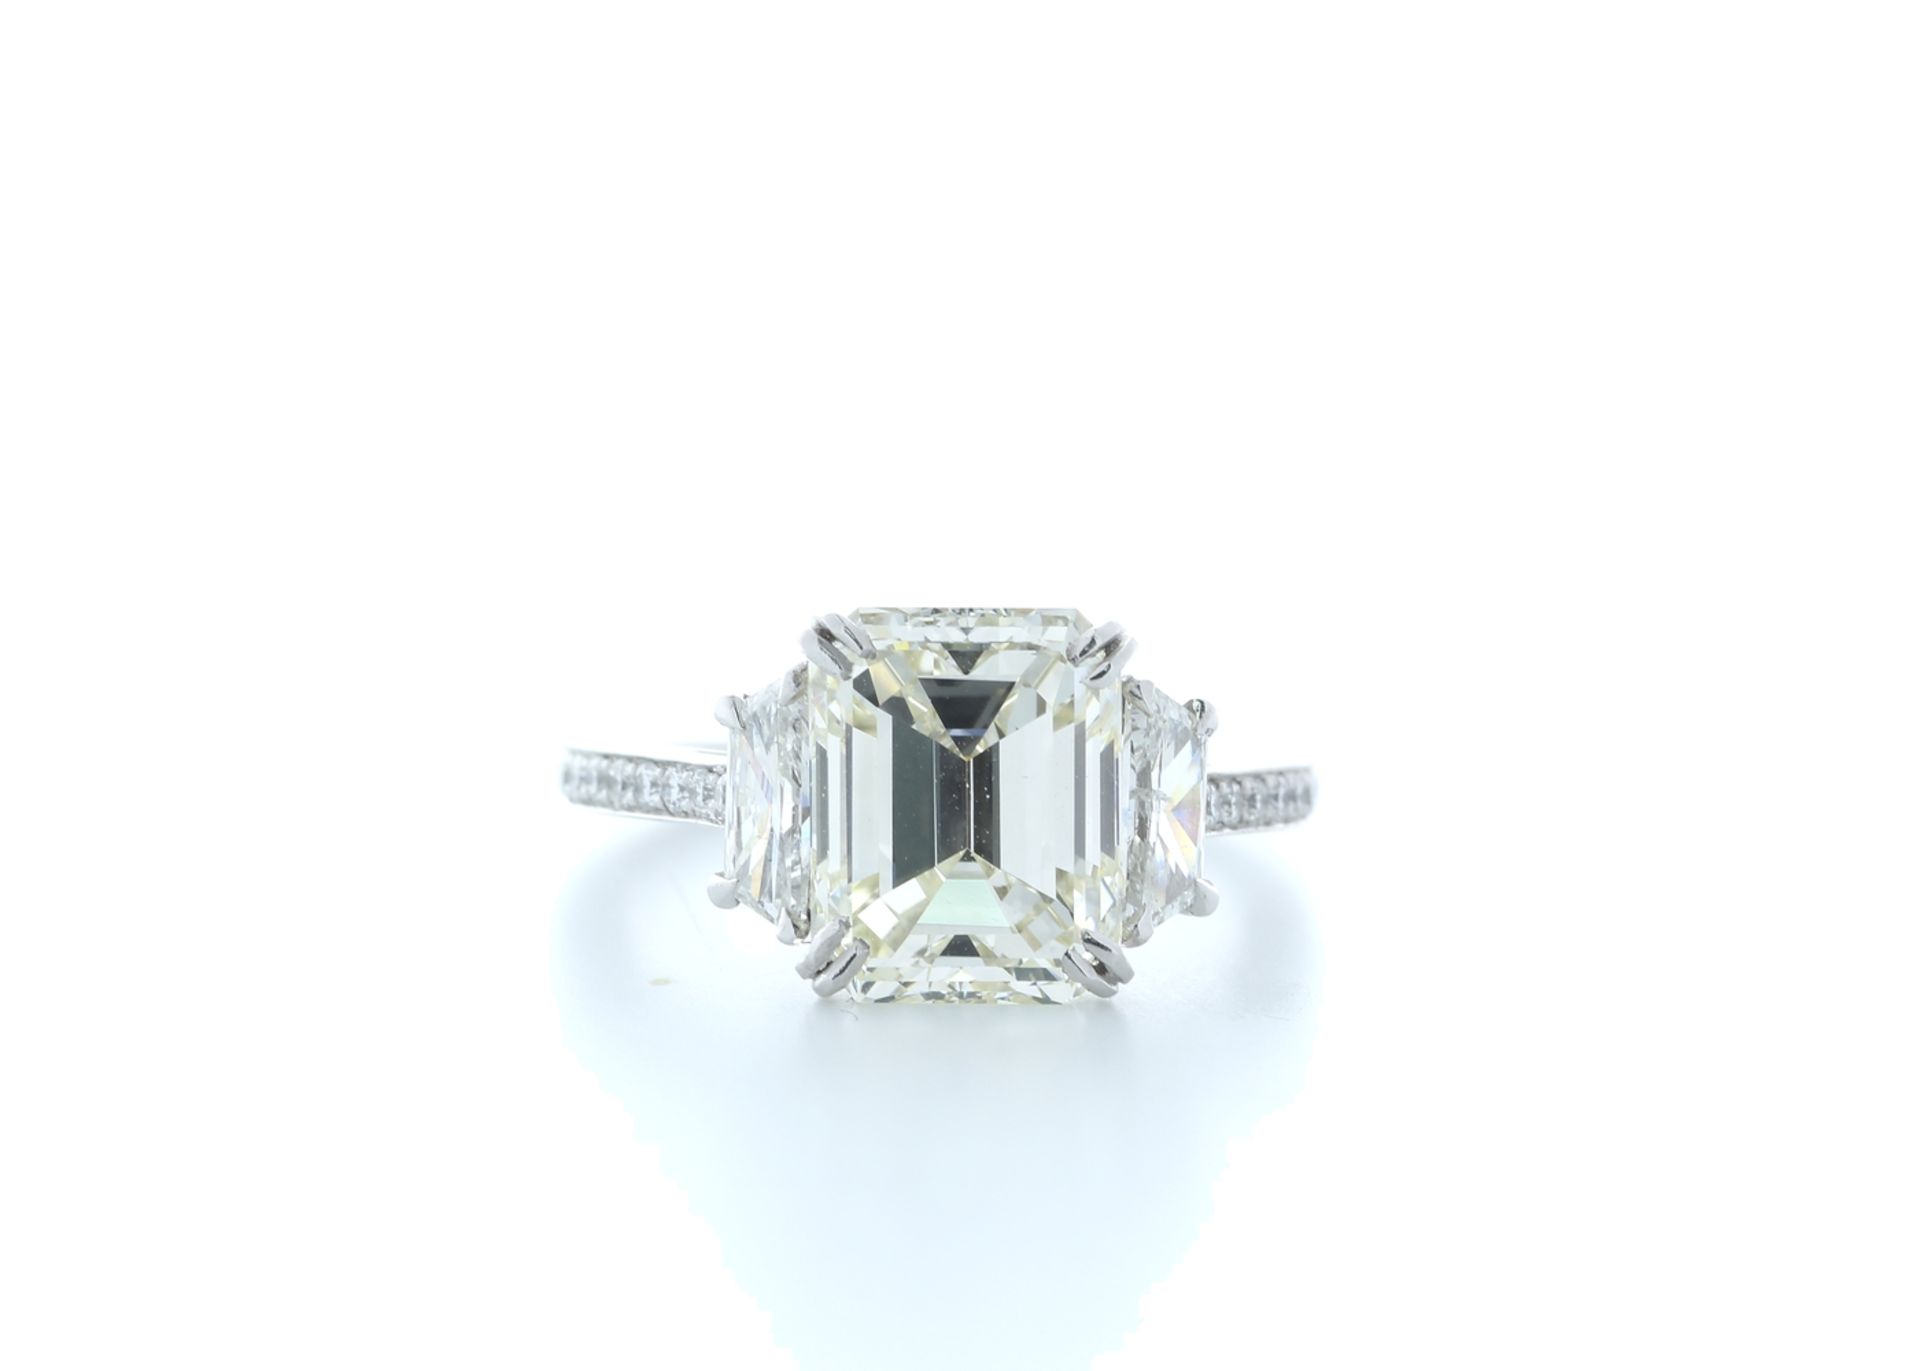 18ct White Gold Emerald Cut Diamond Ring 5.31 (4.56) Carats - Valued by IDI £190,000.00 - 18ct White